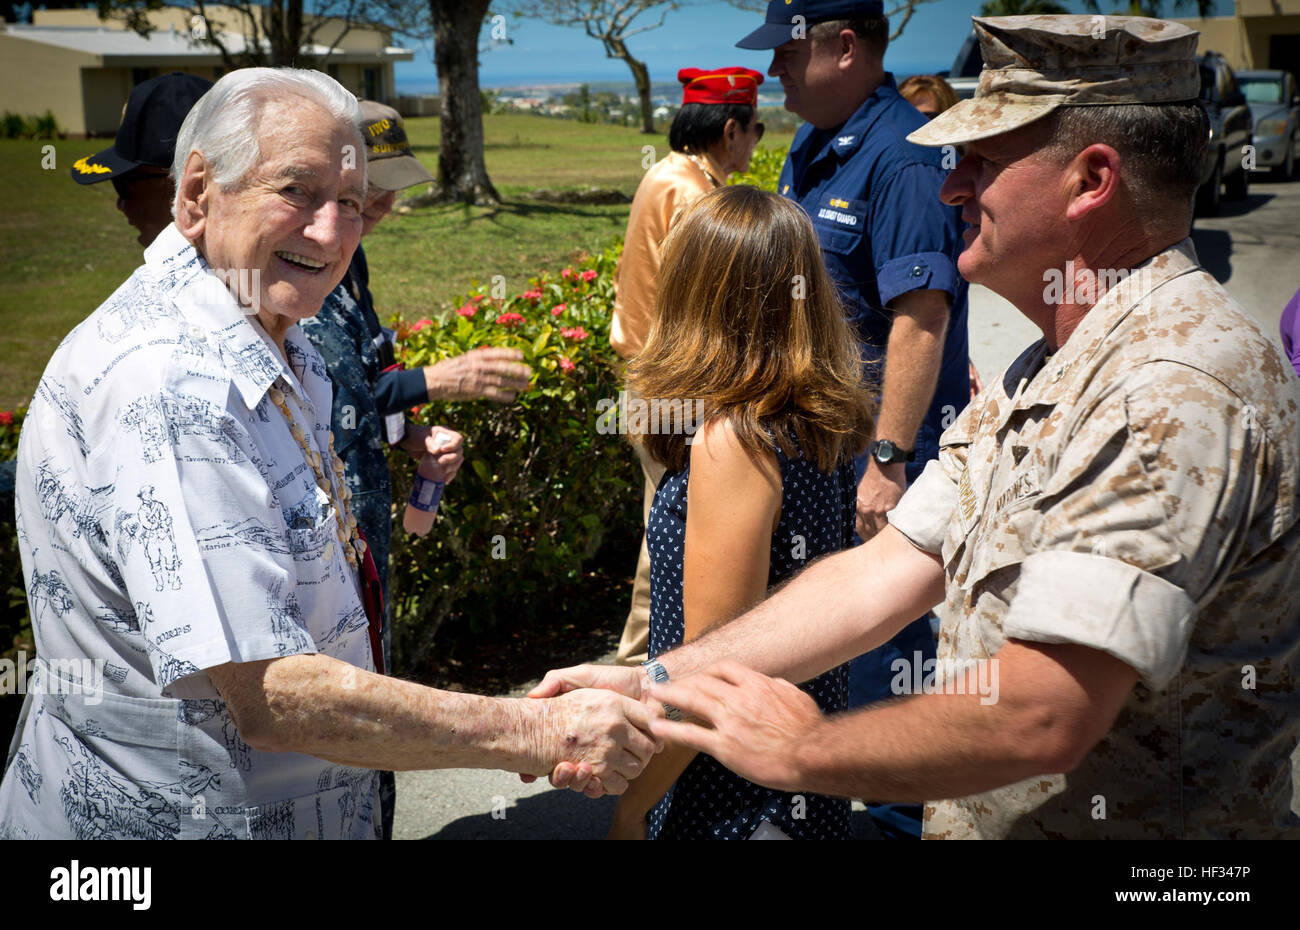 Colonel Philip Zimmerman (right), officer in charge of Marine Corps Activity Guam, greets retired Lt. Gen. Lawrence Snowden during a luncheon at Rear Adm. Bette Bolivar's home for veterans of World War II and other U.S. conflicts. The commander for Joint Region Marianas hosted the veterans at her home on Nimitz Hill for lunch, refreshments and a slice of cake during their island tour visiting war memorials and battle sites. The veterans group then traveled to Iwo Jima, now known officially as Ioto, commemorating the 70th anniversary of the Battle of Iwo Jima. (U.S. Marine Corps photo by Lance  Stock Photo